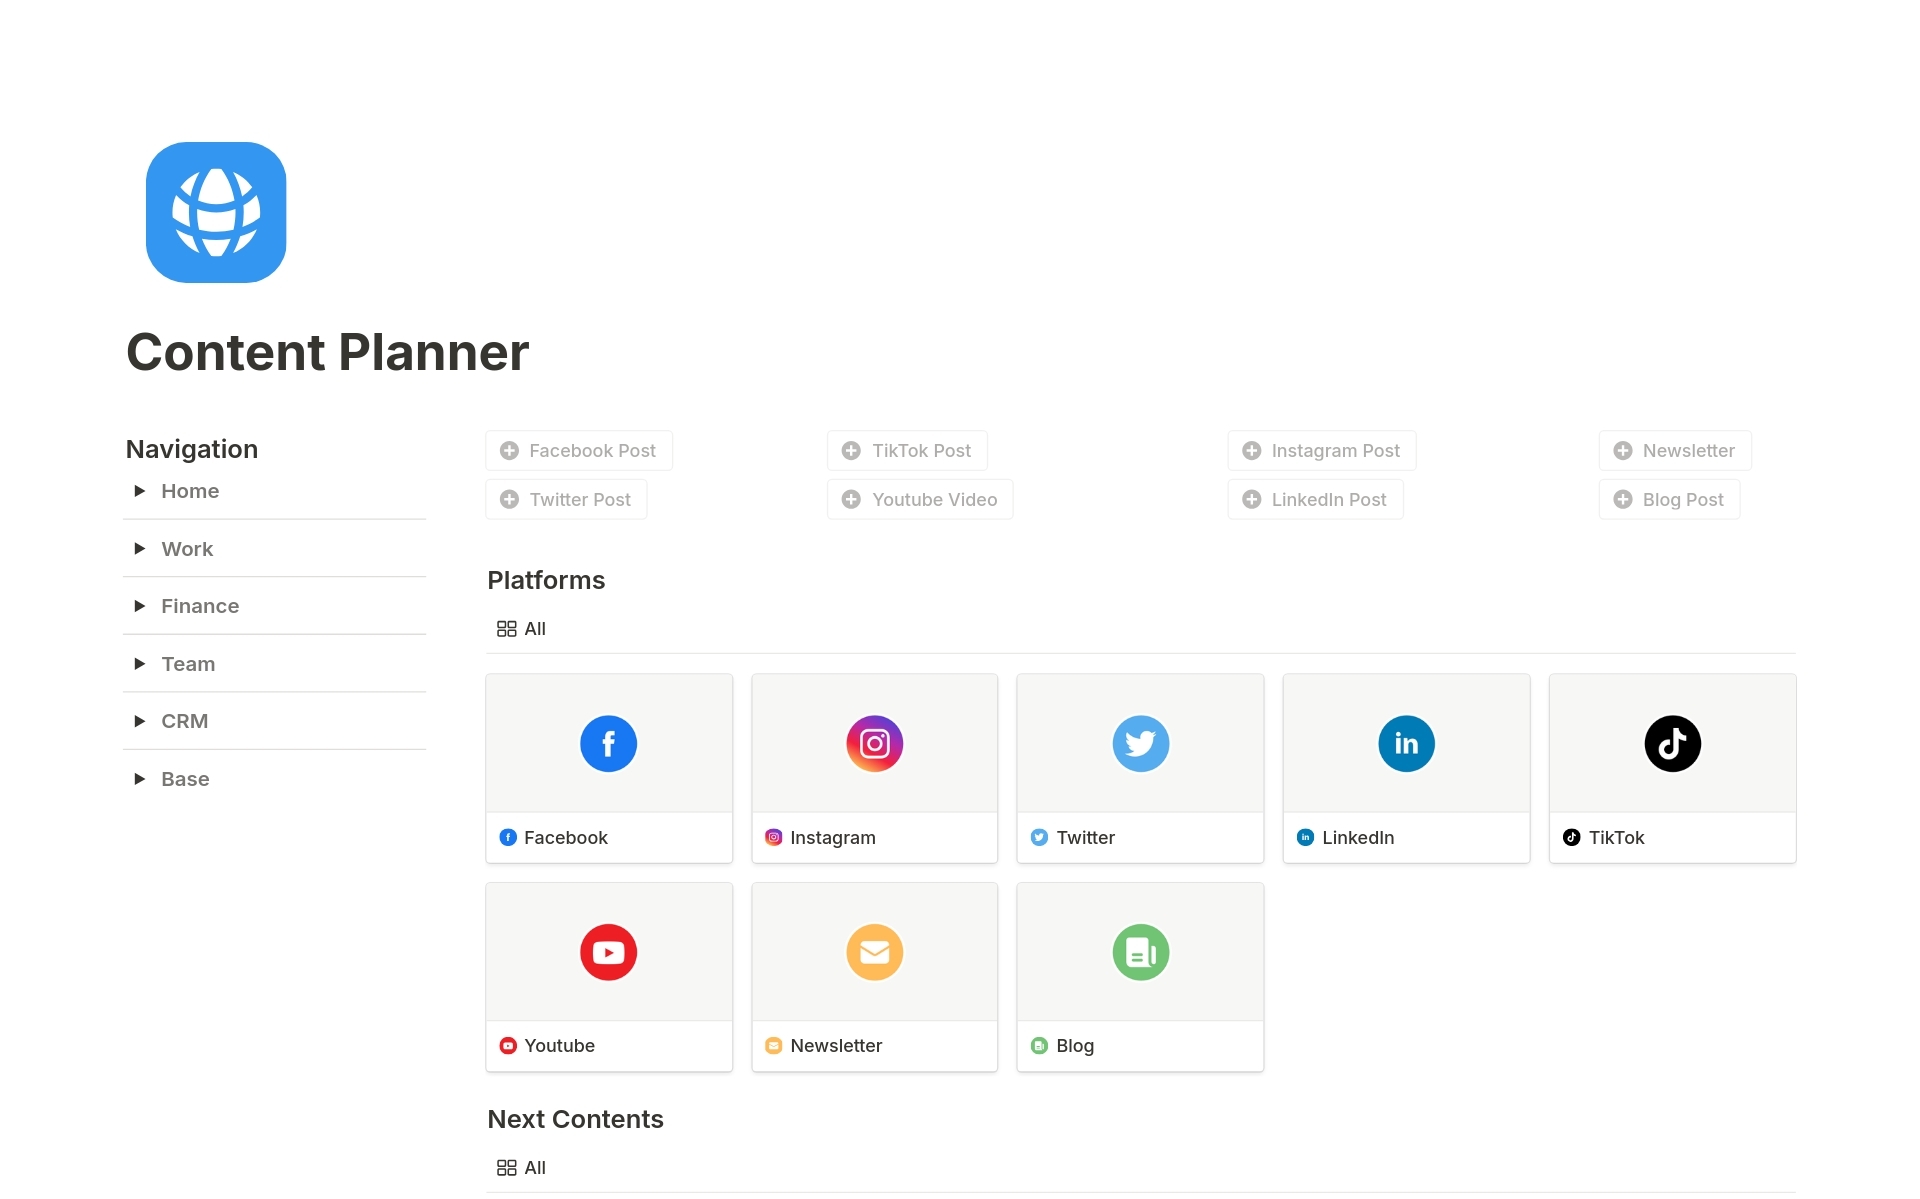 Notion Intranet Business Management template built for small businesses, agencies, large teams, companies, startups, and freelancers. Organize your business in one place with this Notion template.